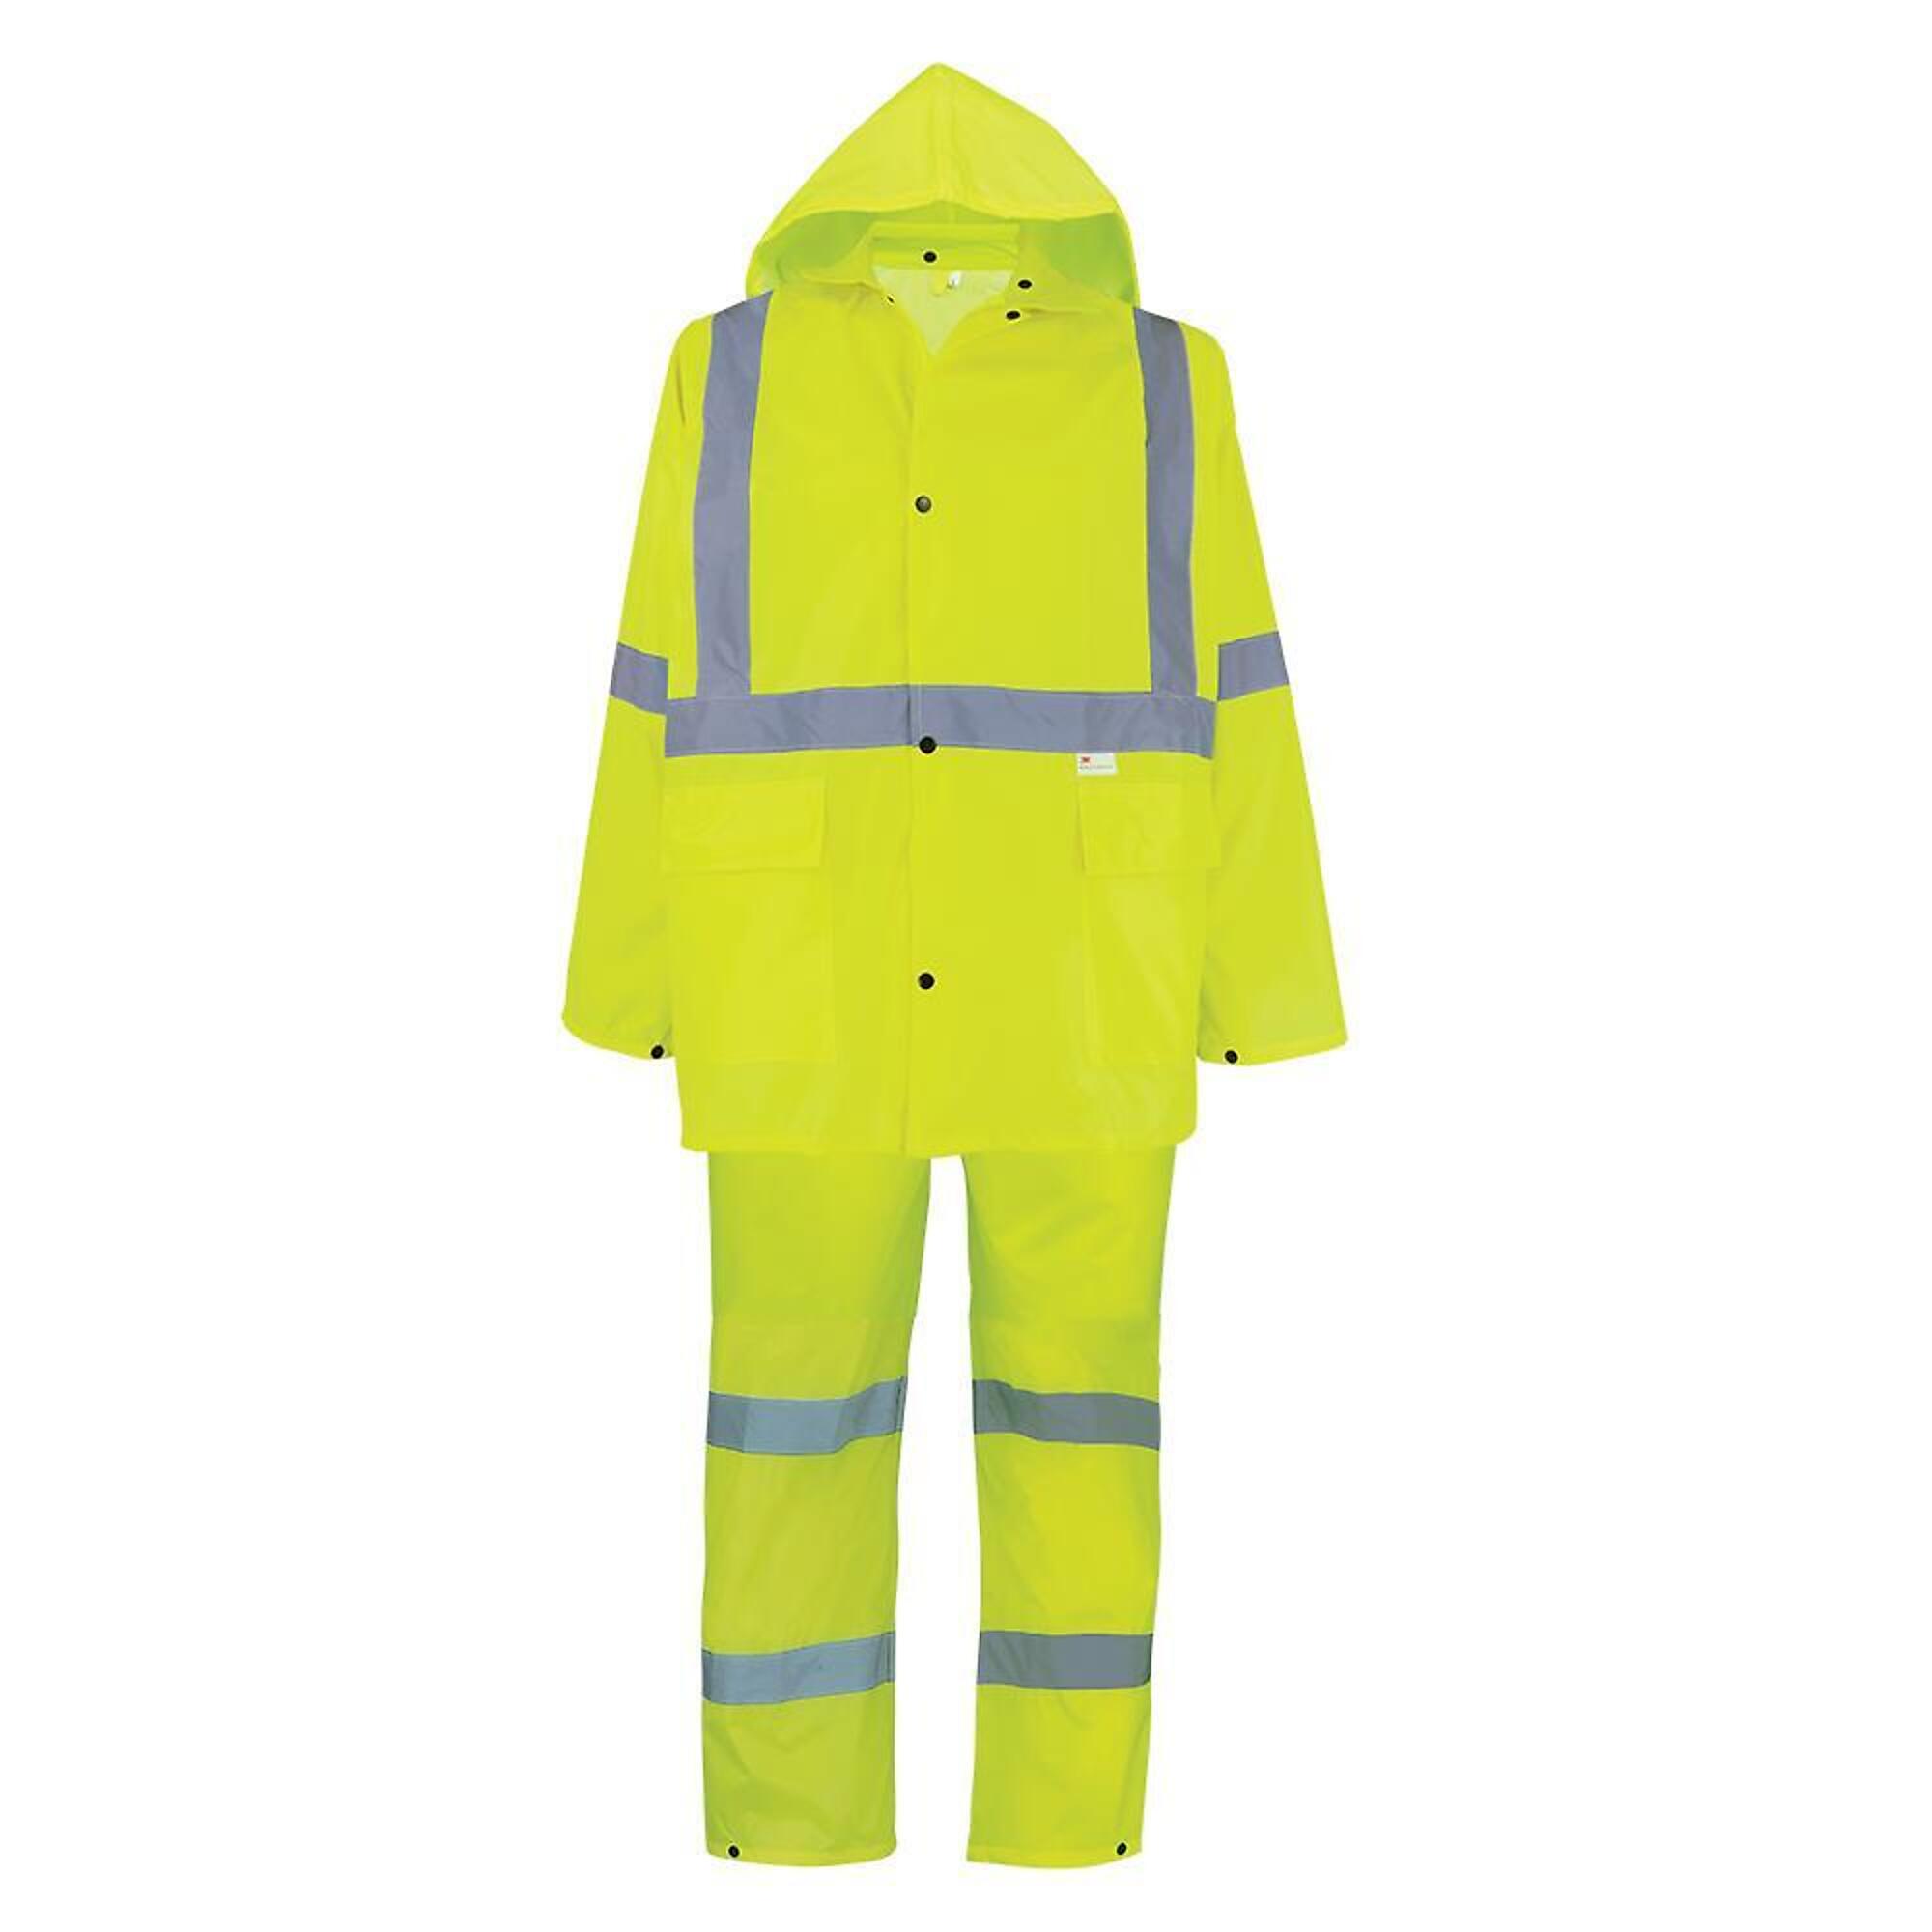 FrogWear, HV Yellow/Green, Class 3 Three-Piece Rain Suit, Size 4XL, Color High-Visibility Yellow/Green, Model GLO-8000-4XL